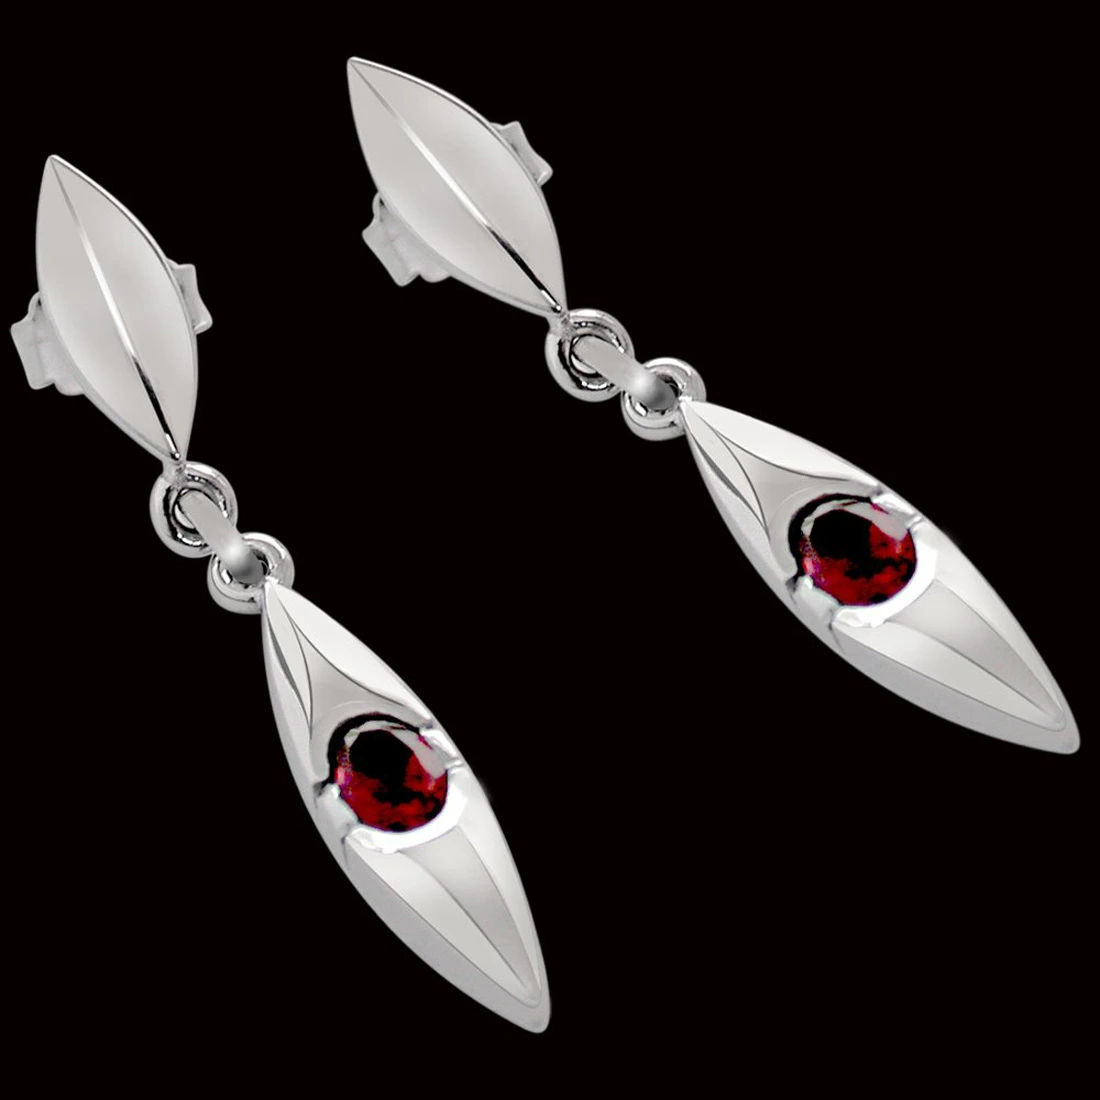 Adoration - Oval Shaped Red Garnet & Sterling Silver hanging Earrings for Women (SDS85)